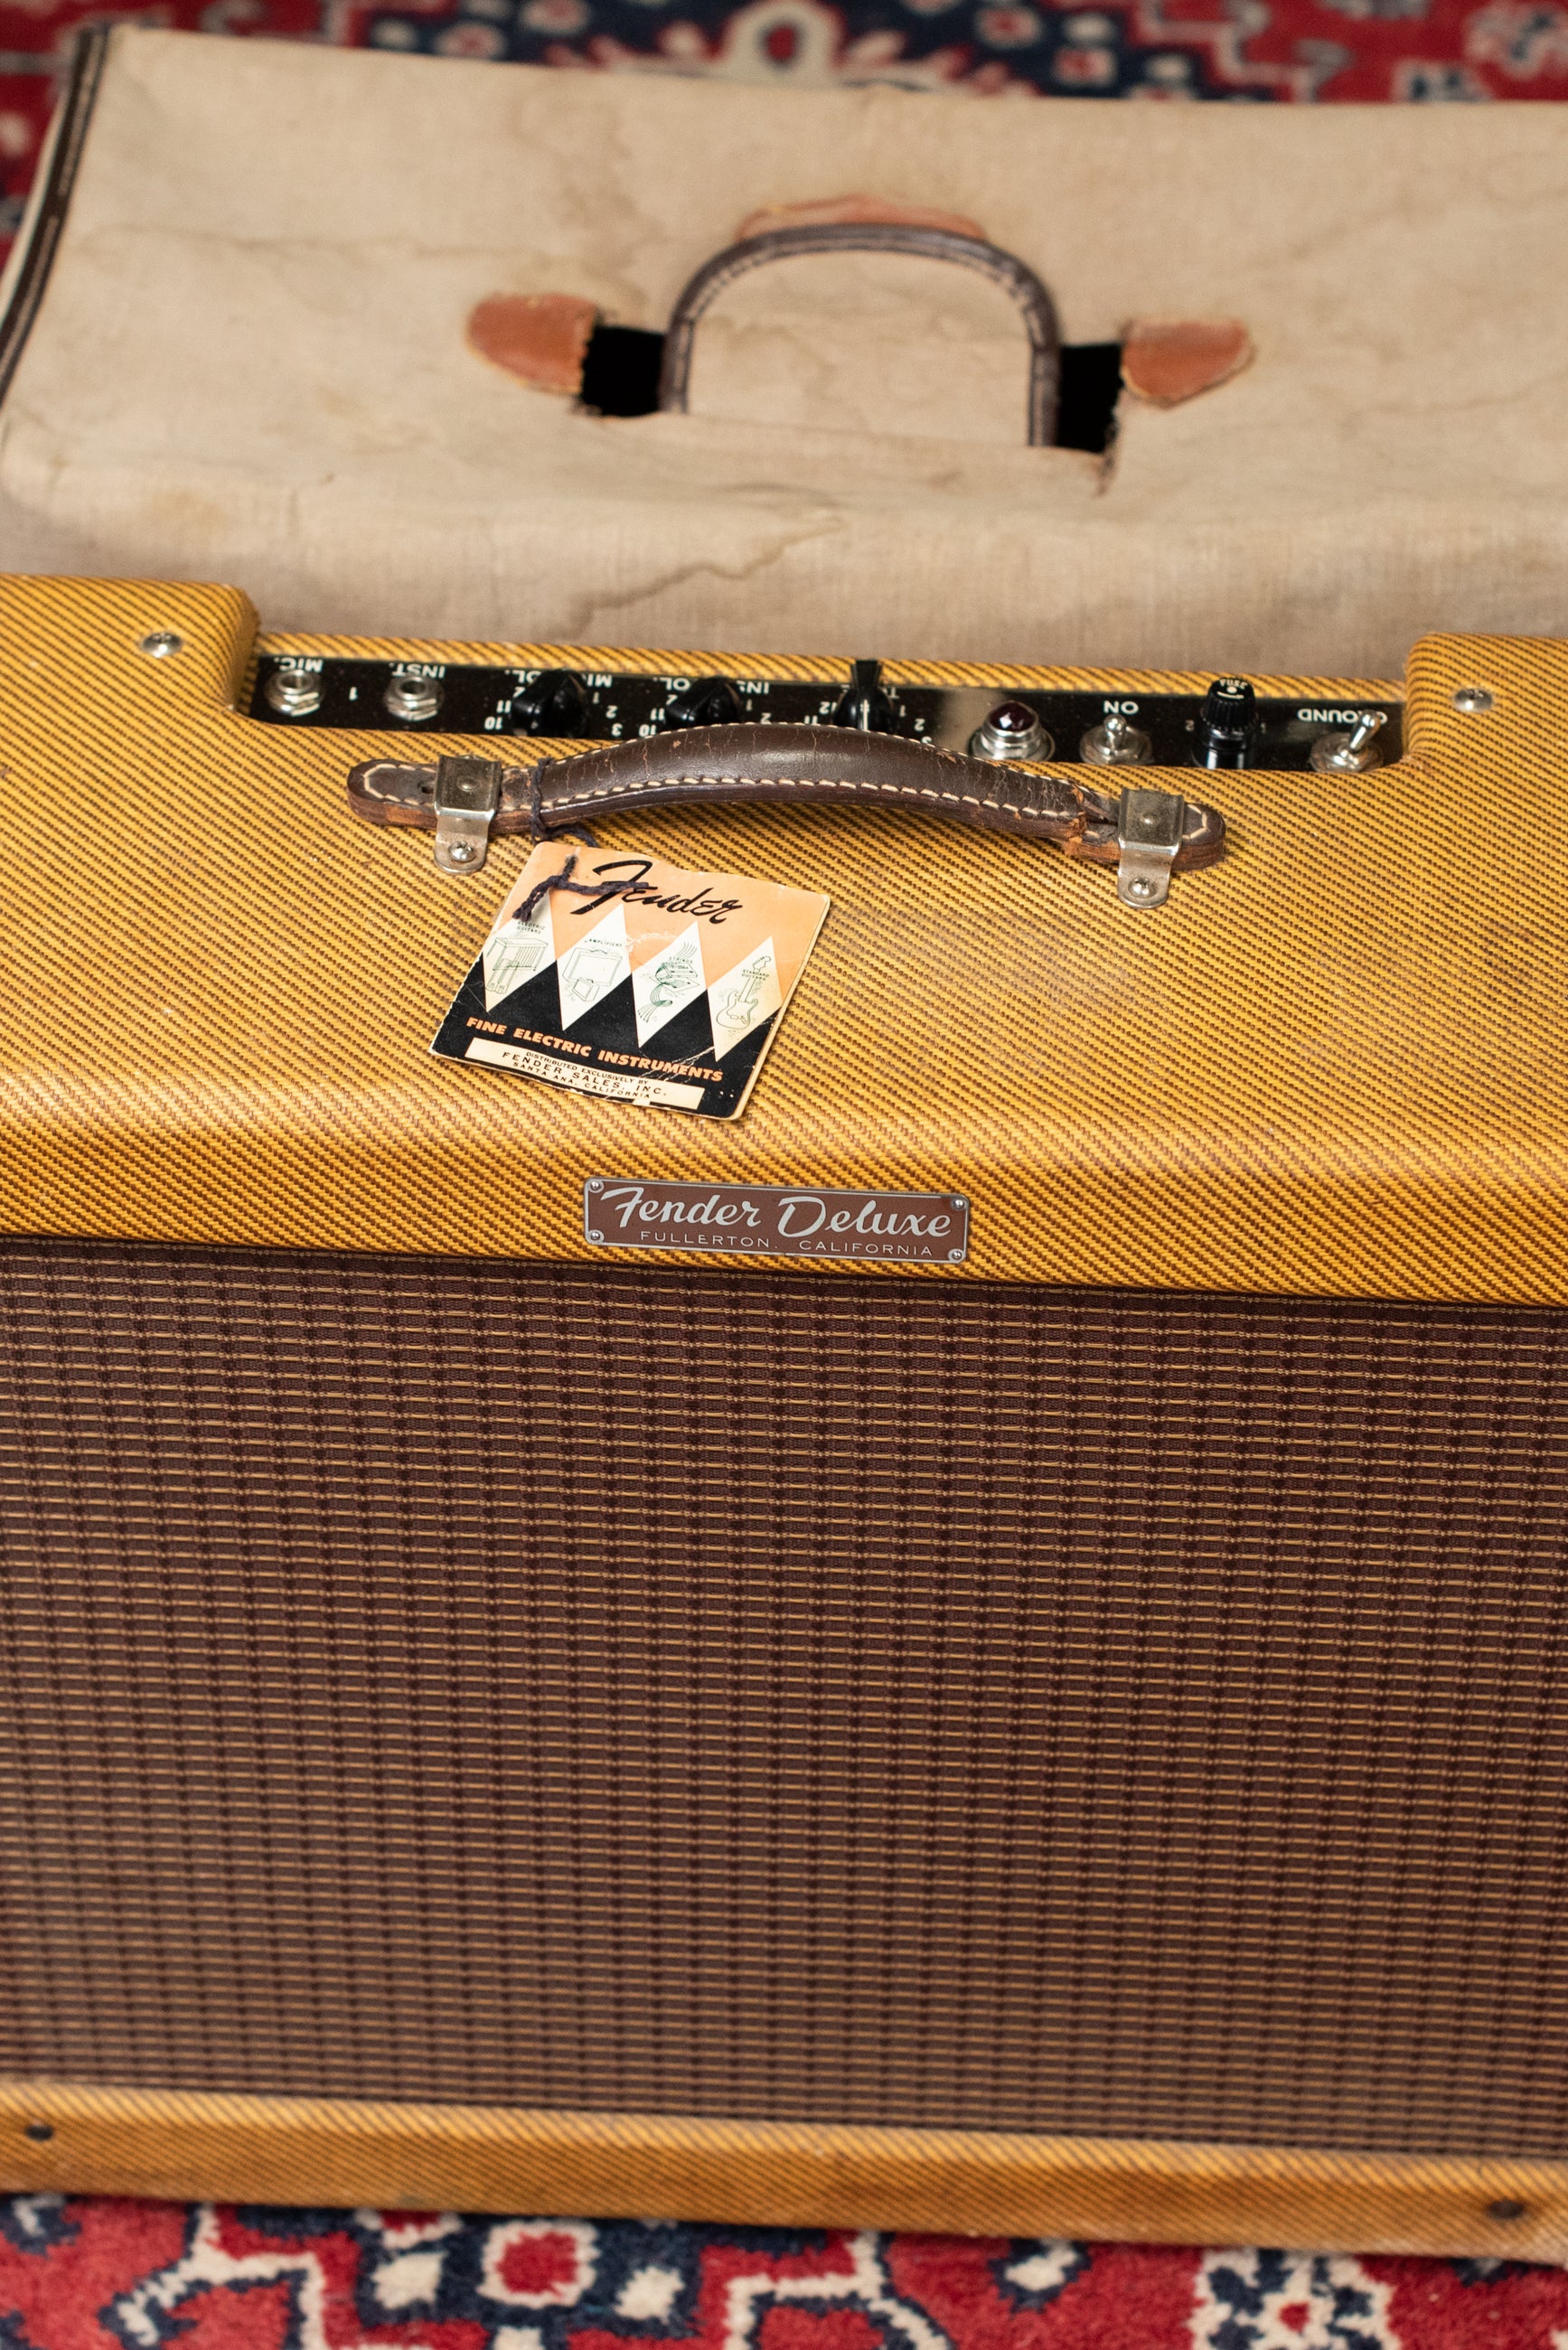 Vintage 1958 Fender Deluxe Amp with hang tag